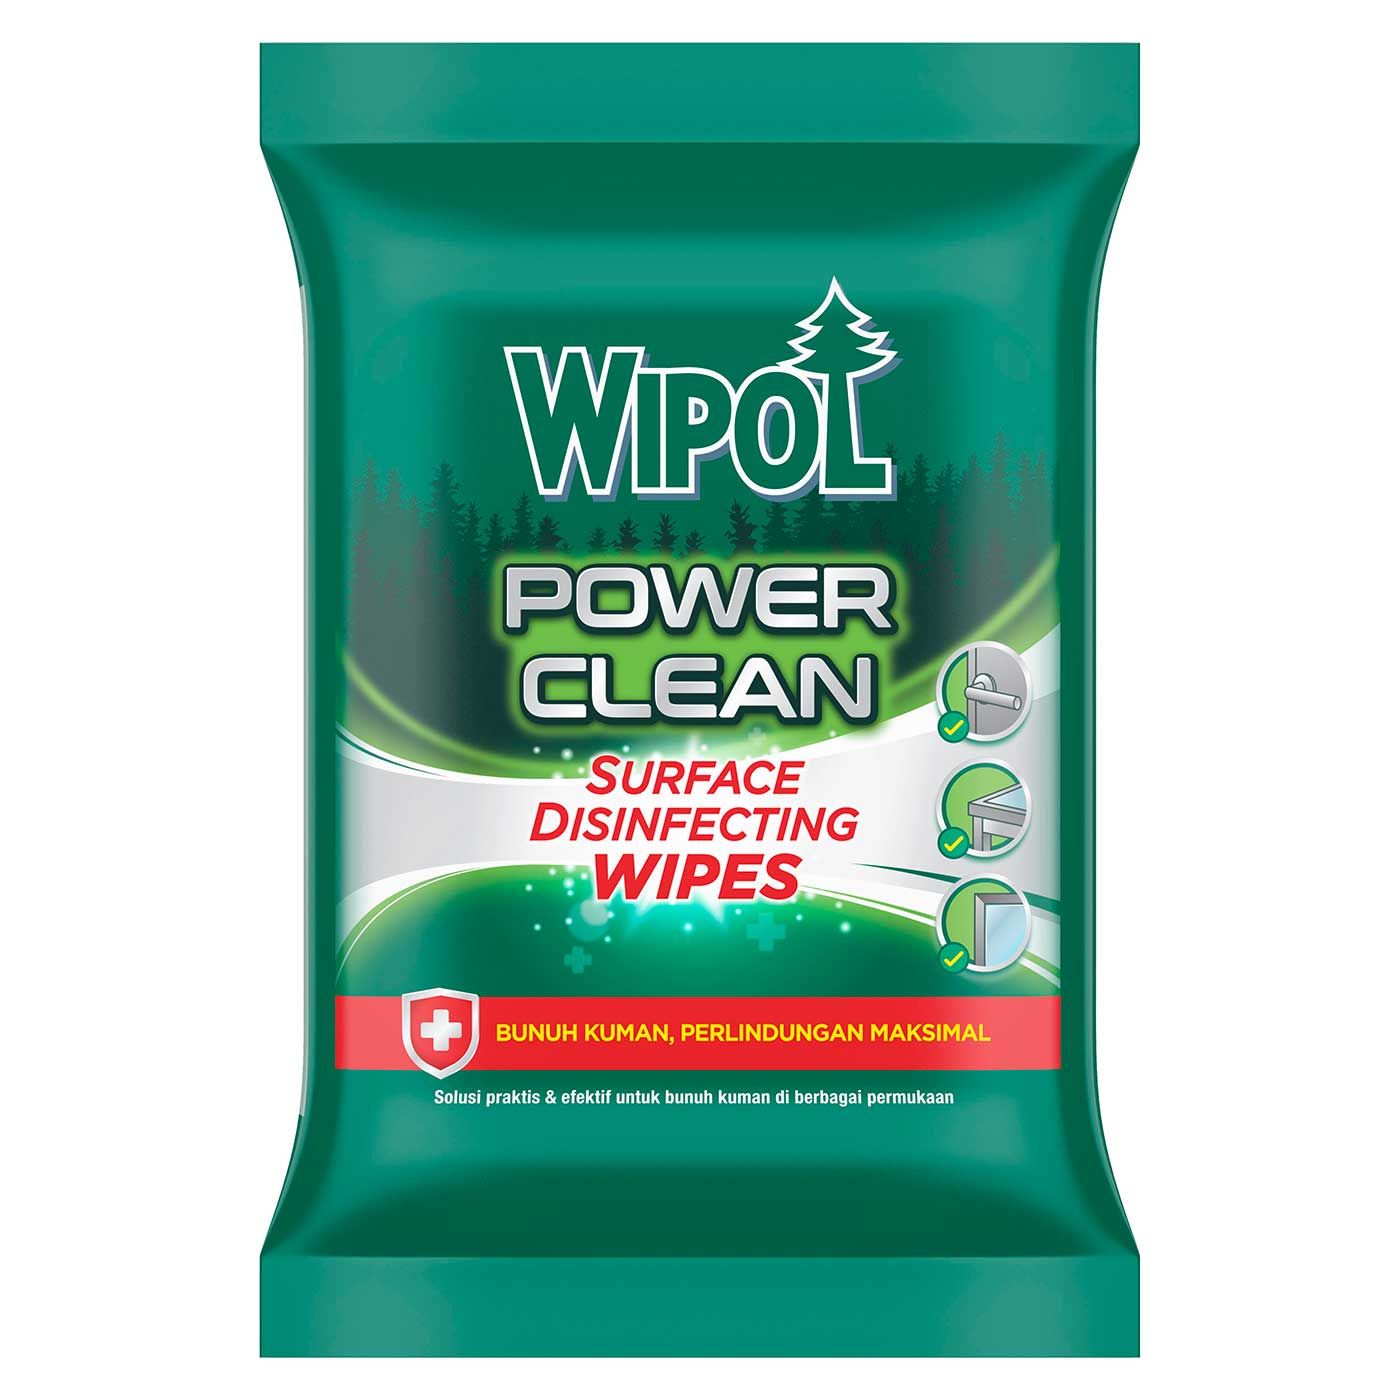 Wipol Multisurface Wipes 10s - 2